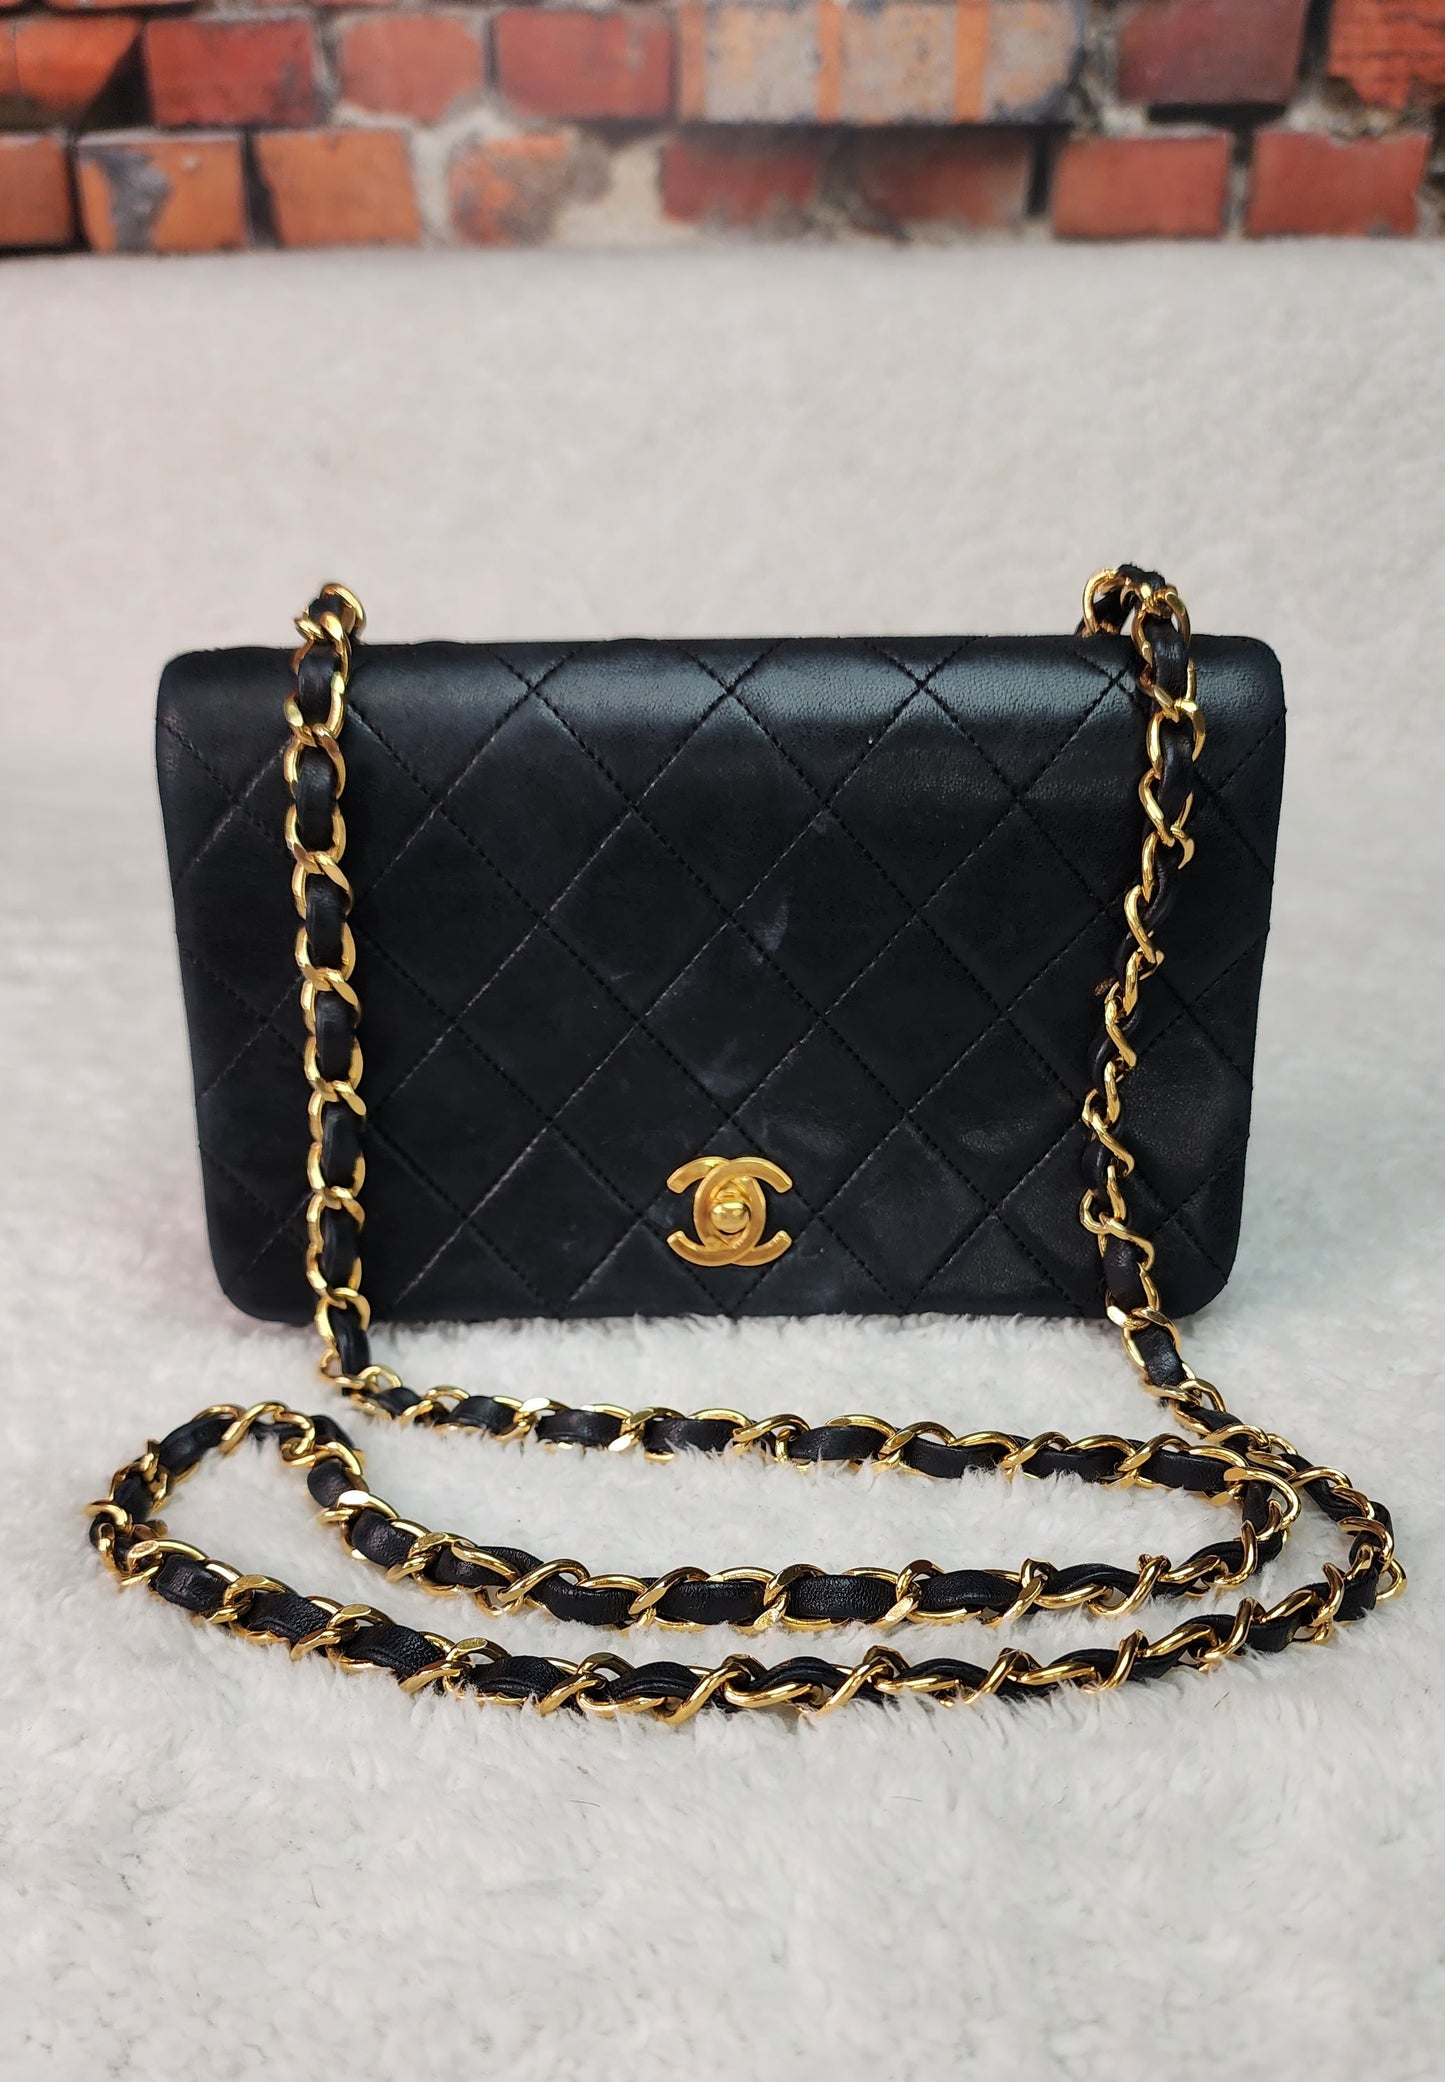 Chanel Beige And Black Shearling Large Single Flap Bag Gold